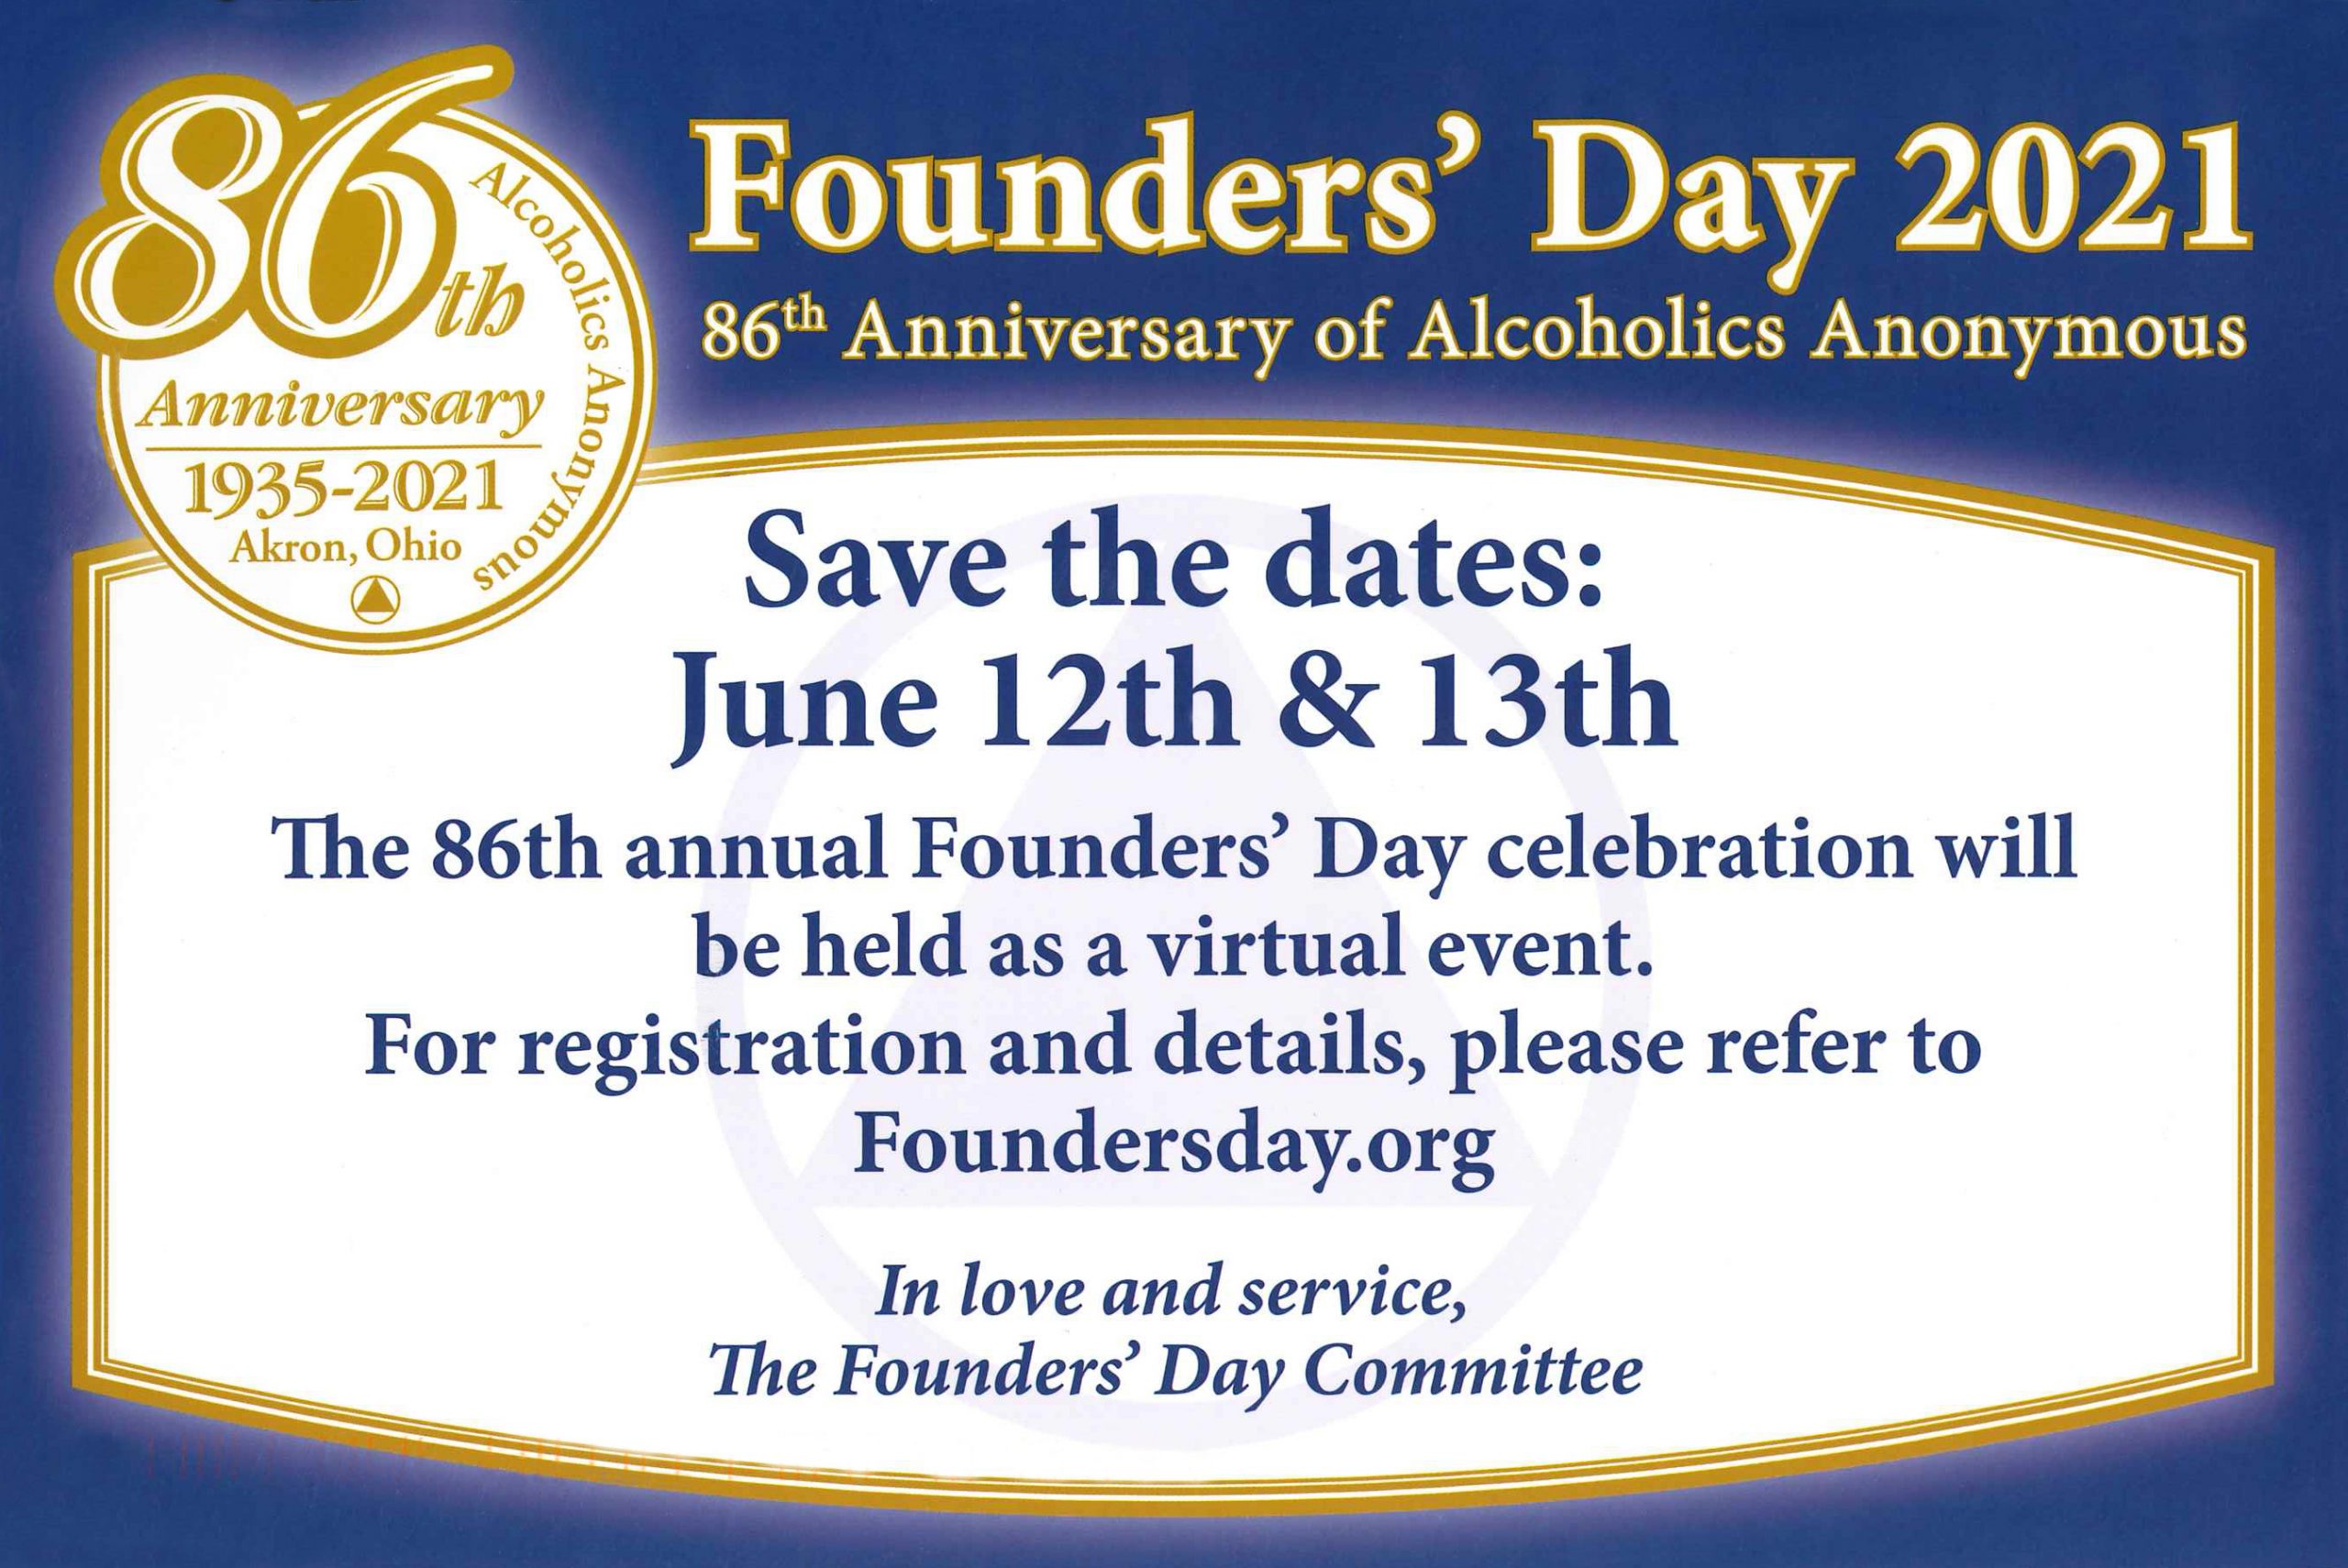 Founders’ Day Akron 2021 San Francisco and Marin Intergroup